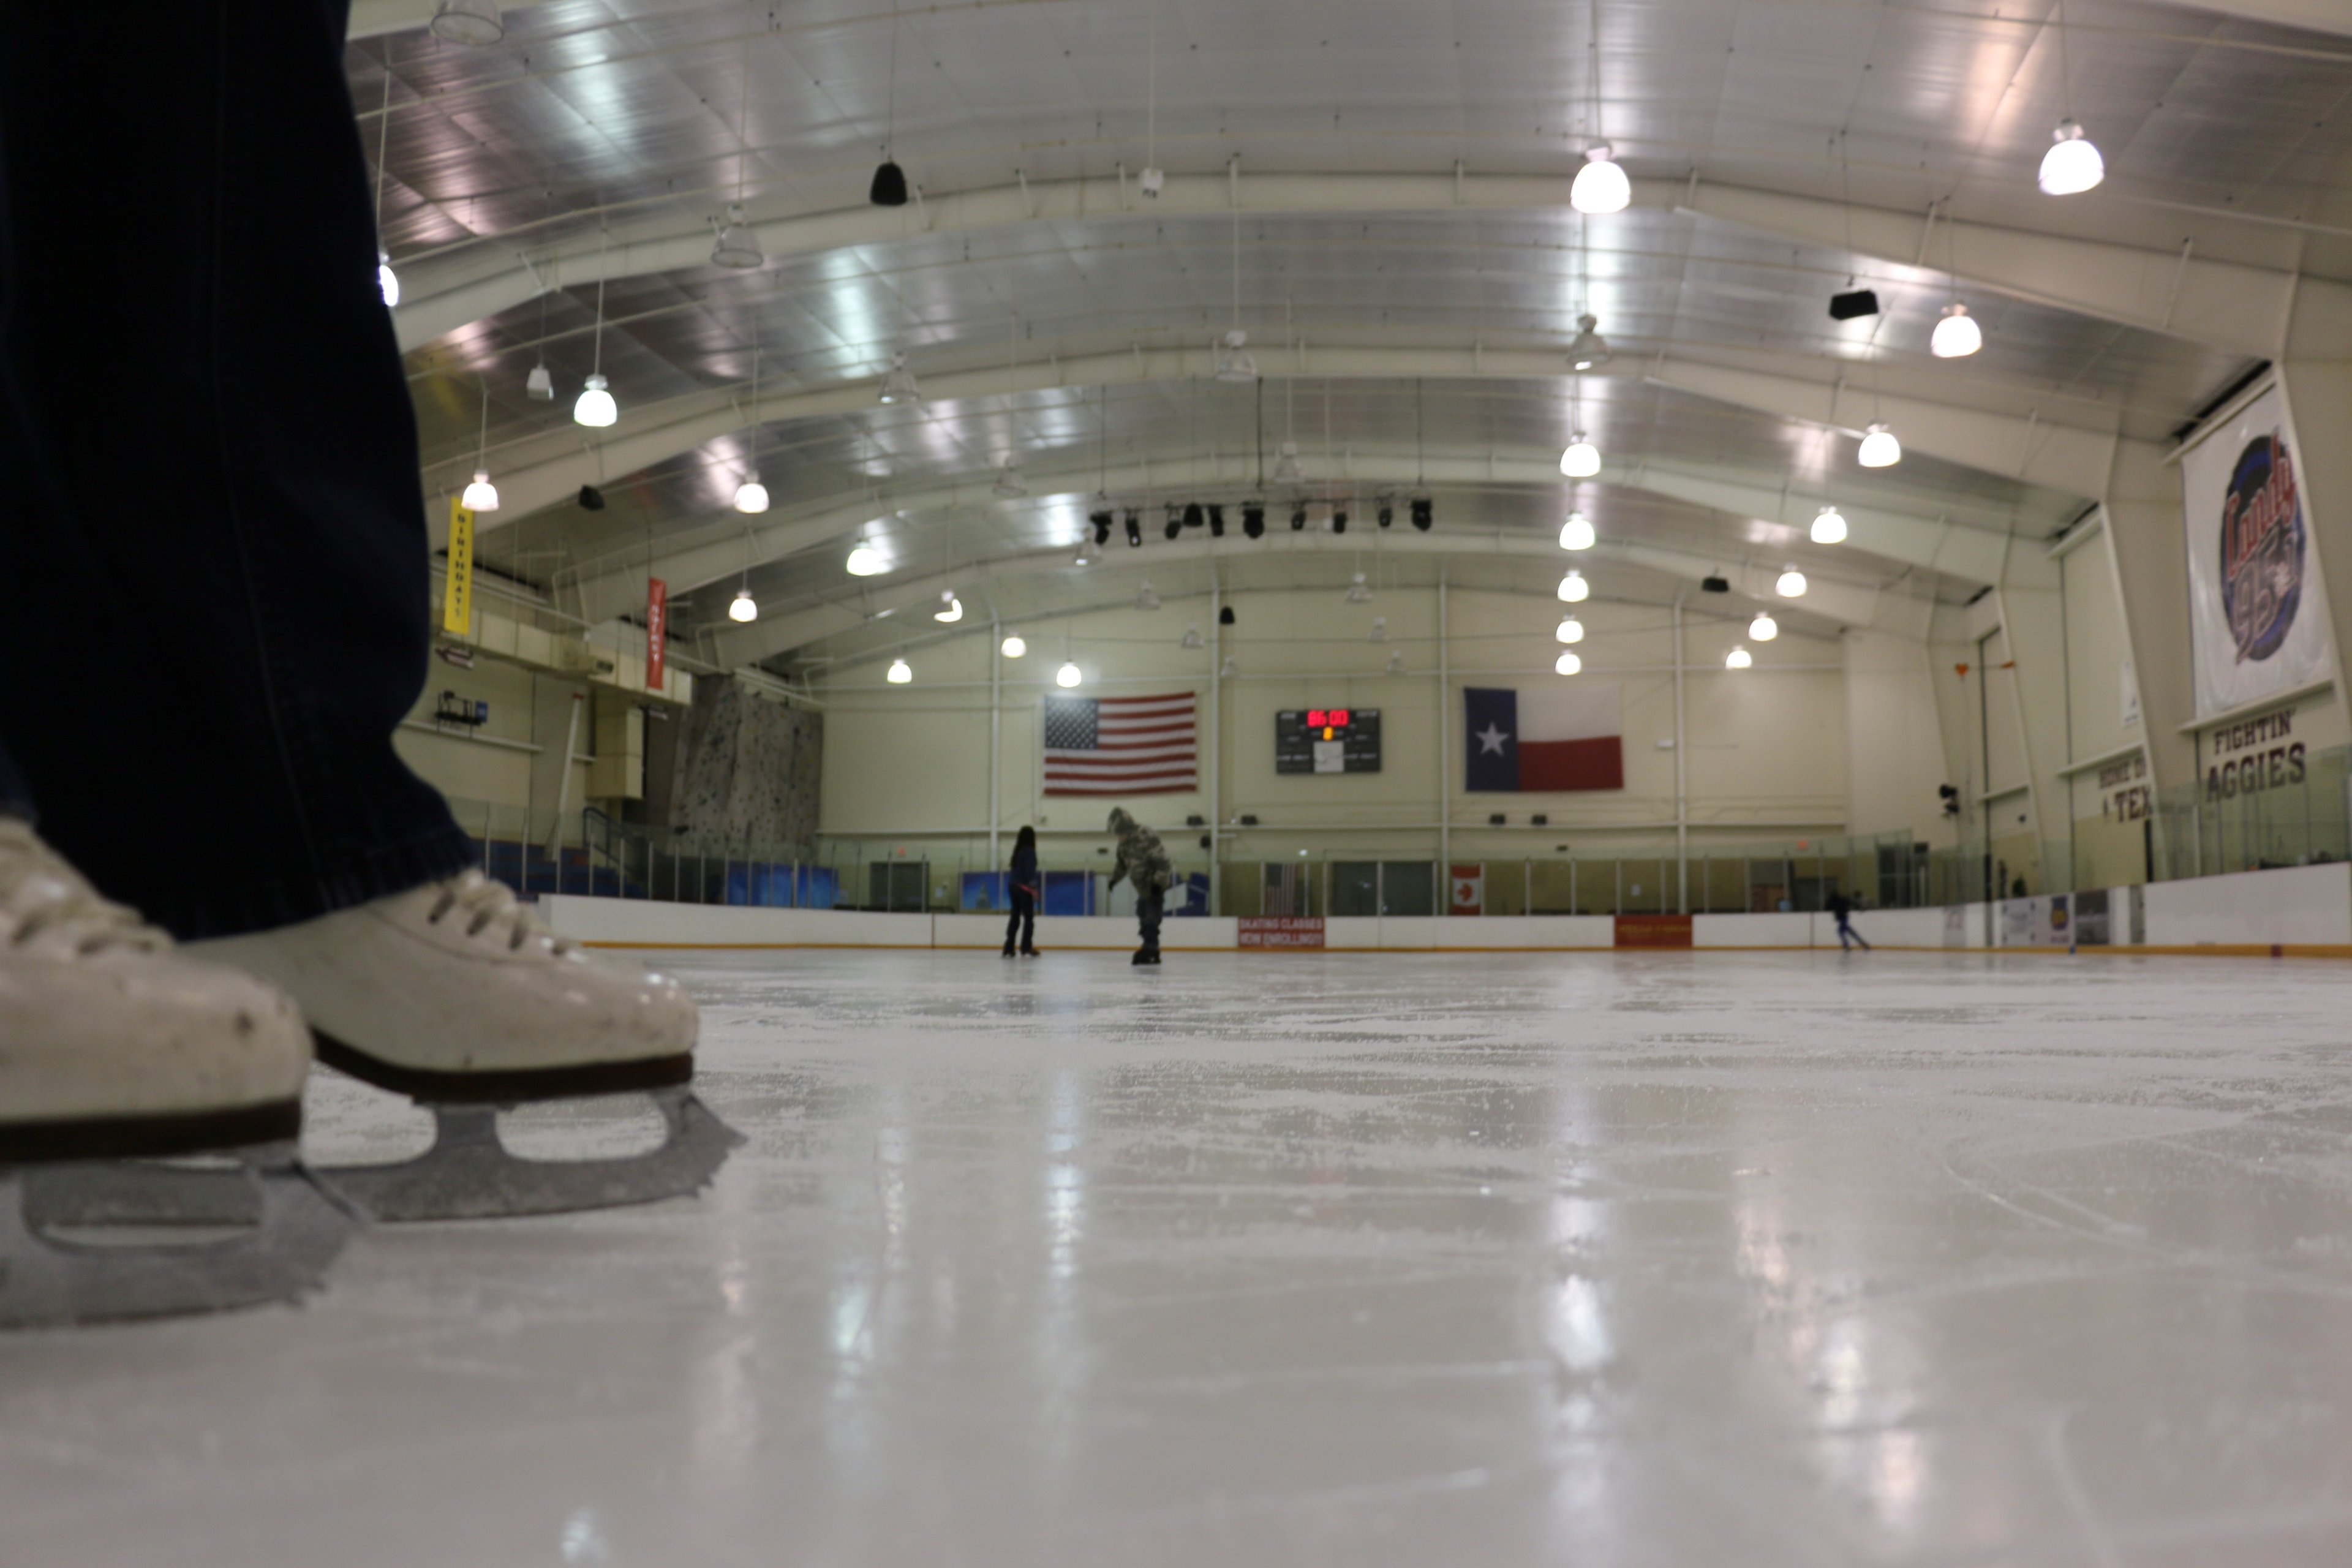 Spirit Ice Arena offers ice skating year round for family fun!